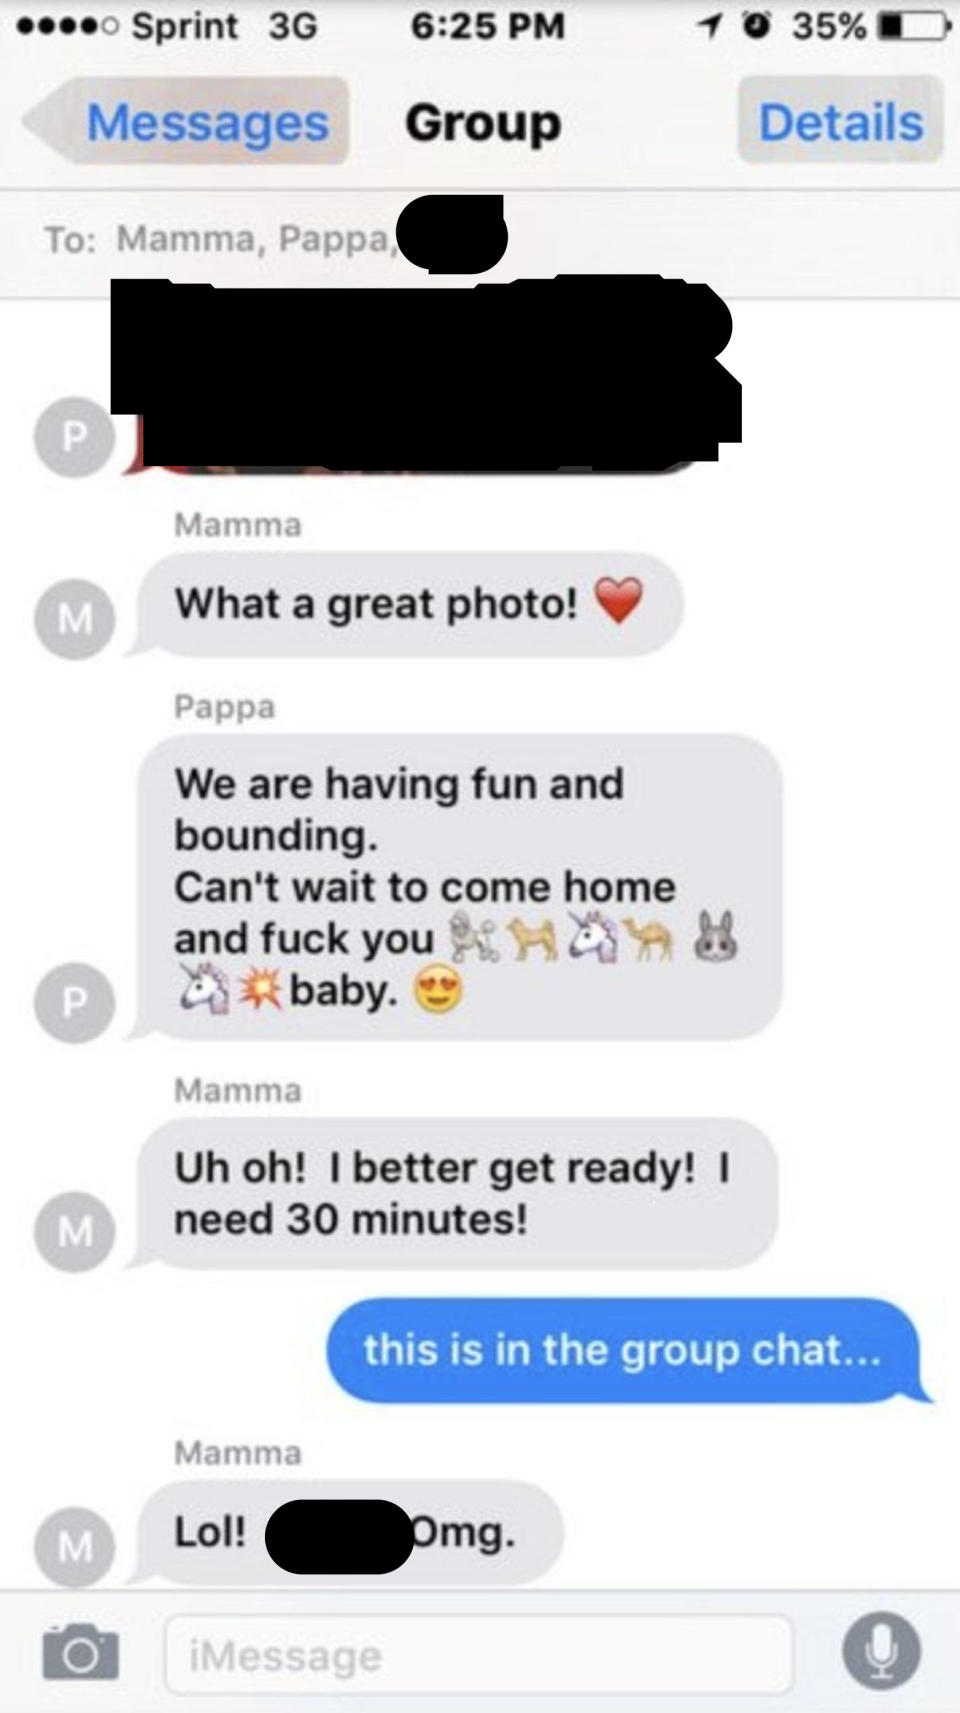 mom and dad talk about having sex when the dad gets home and the son lets them know it's a group chat